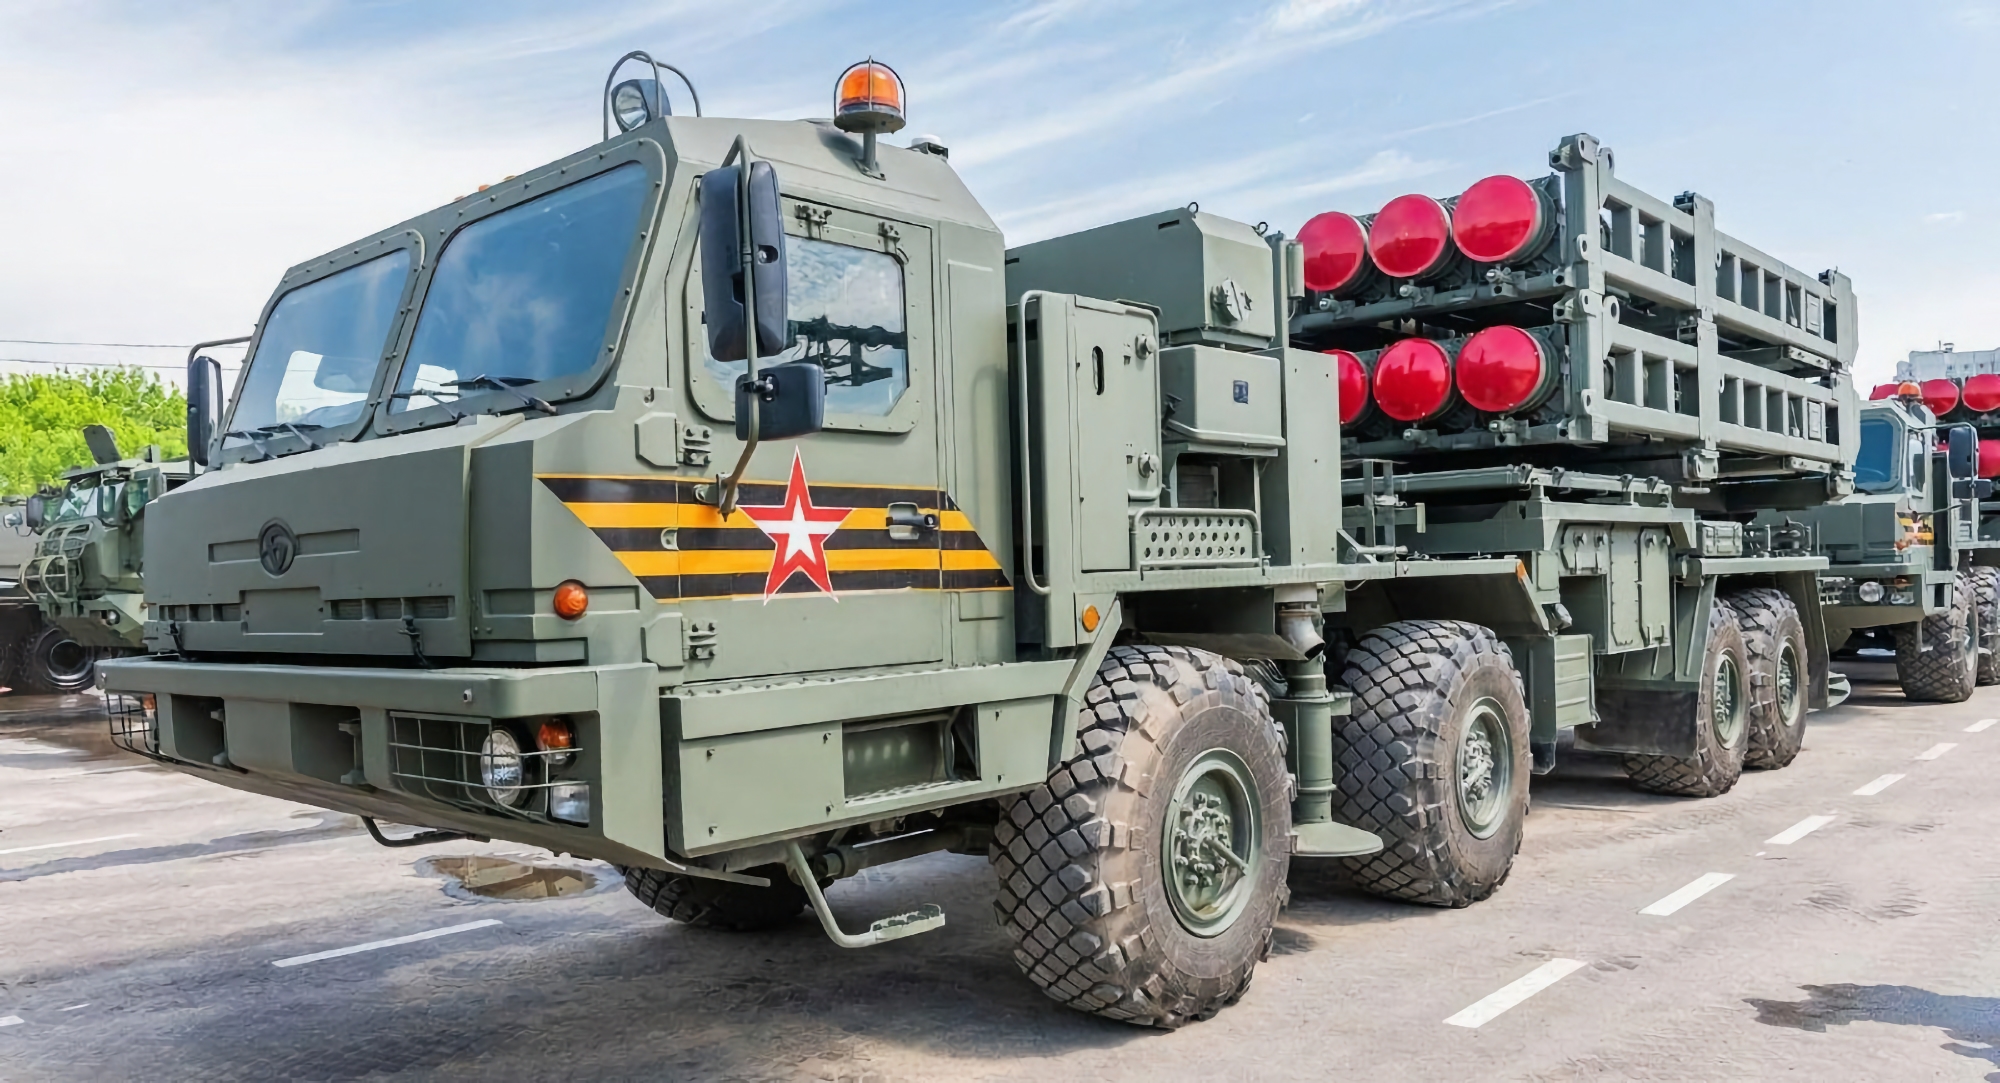 Two Ukrainian FPV drones destroyed a modern Russian S-350 Vityaz S-350 SAM system worth more than $135,000,000,000 (video)